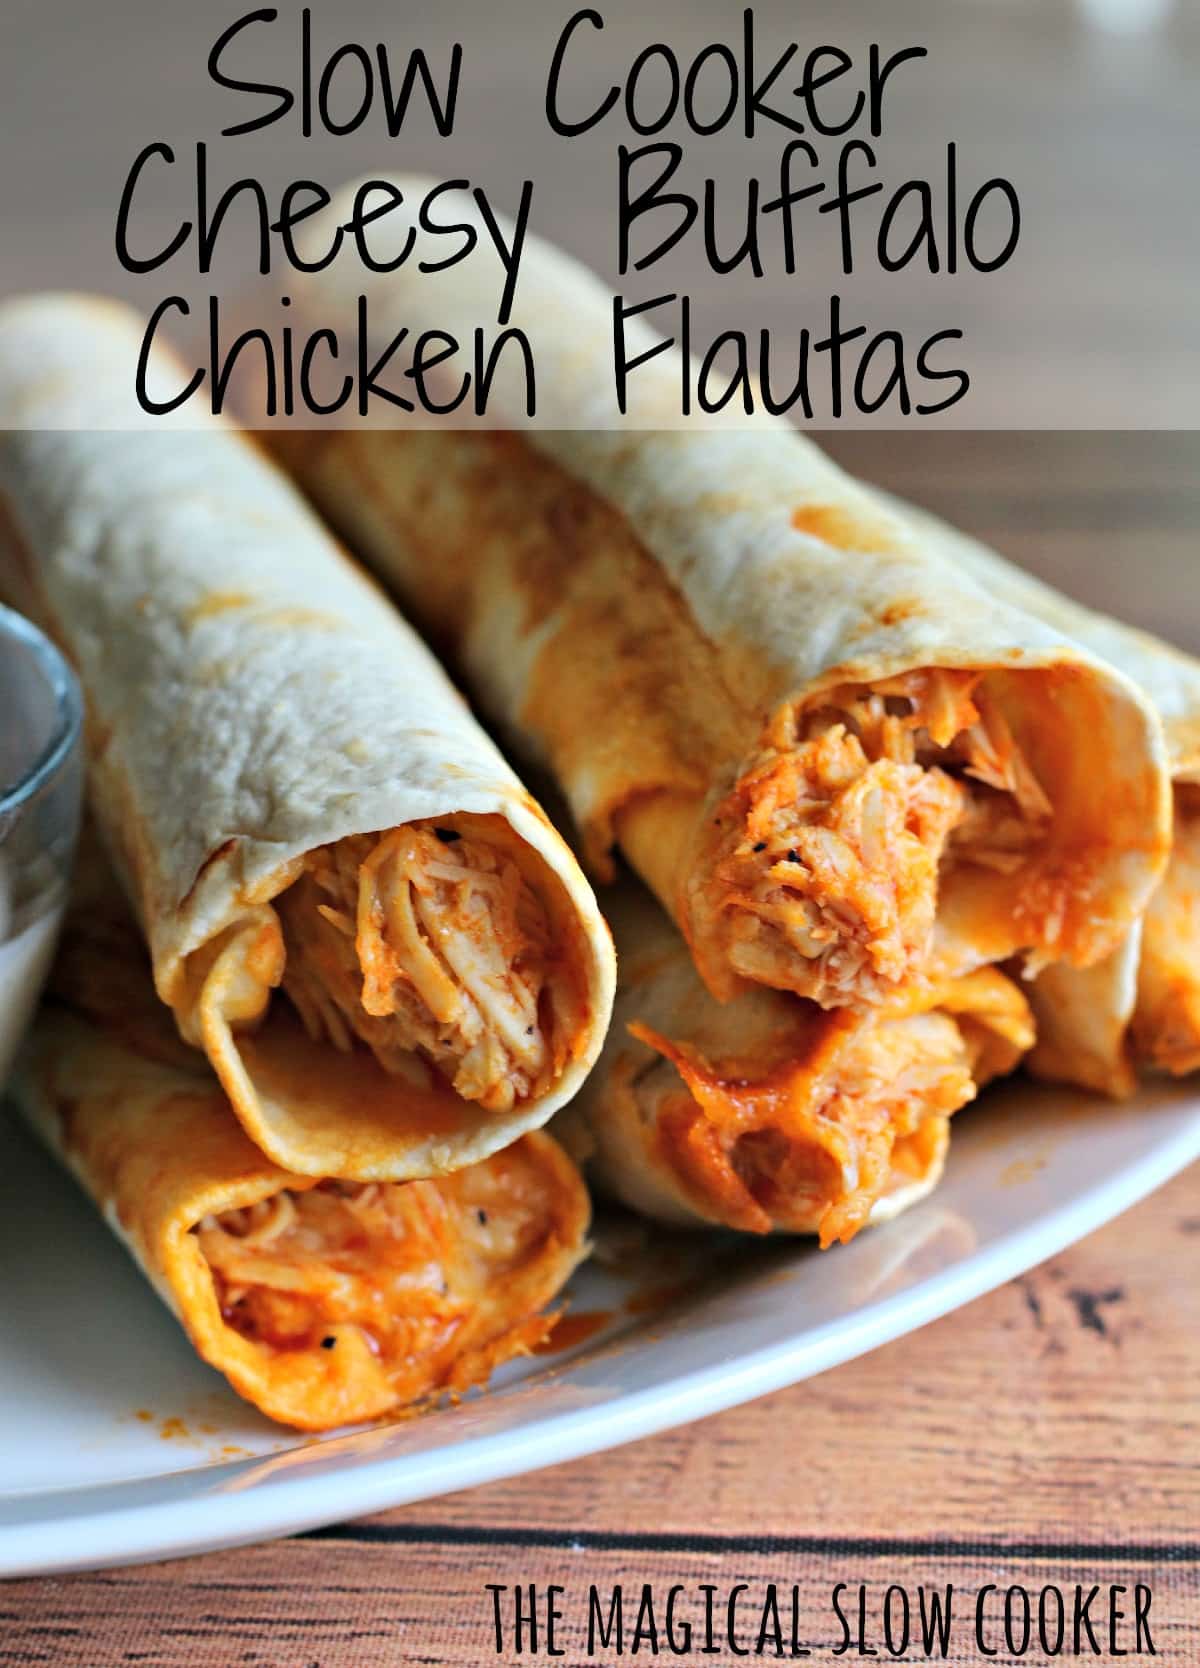 flautas on plate, text over image for pinterest